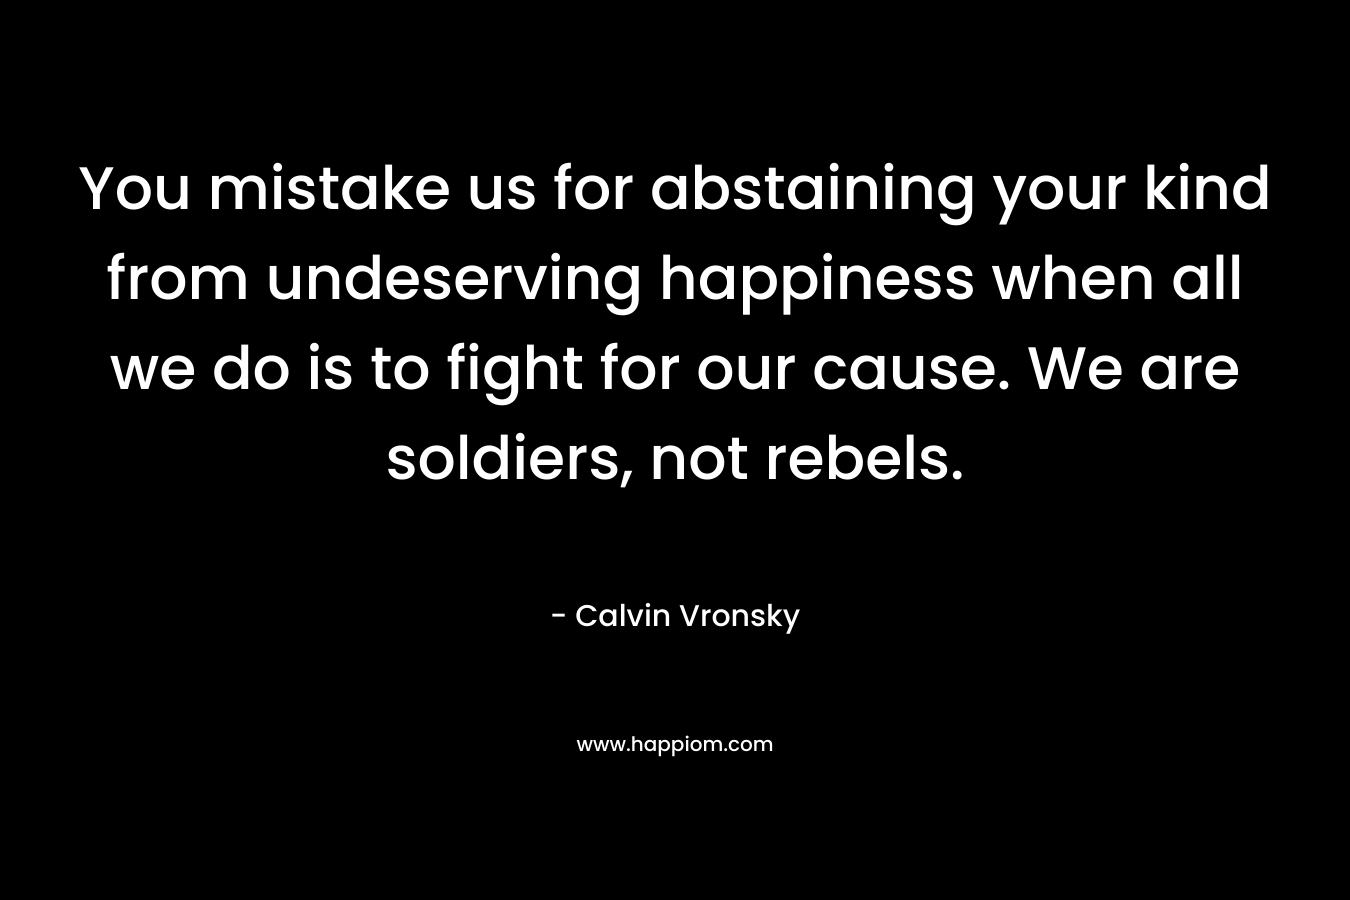 You mistake us for abstaining your kind from undeserving happiness when all we do is to fight for our cause. We are soldiers, not rebels. – Calvin Vronsky